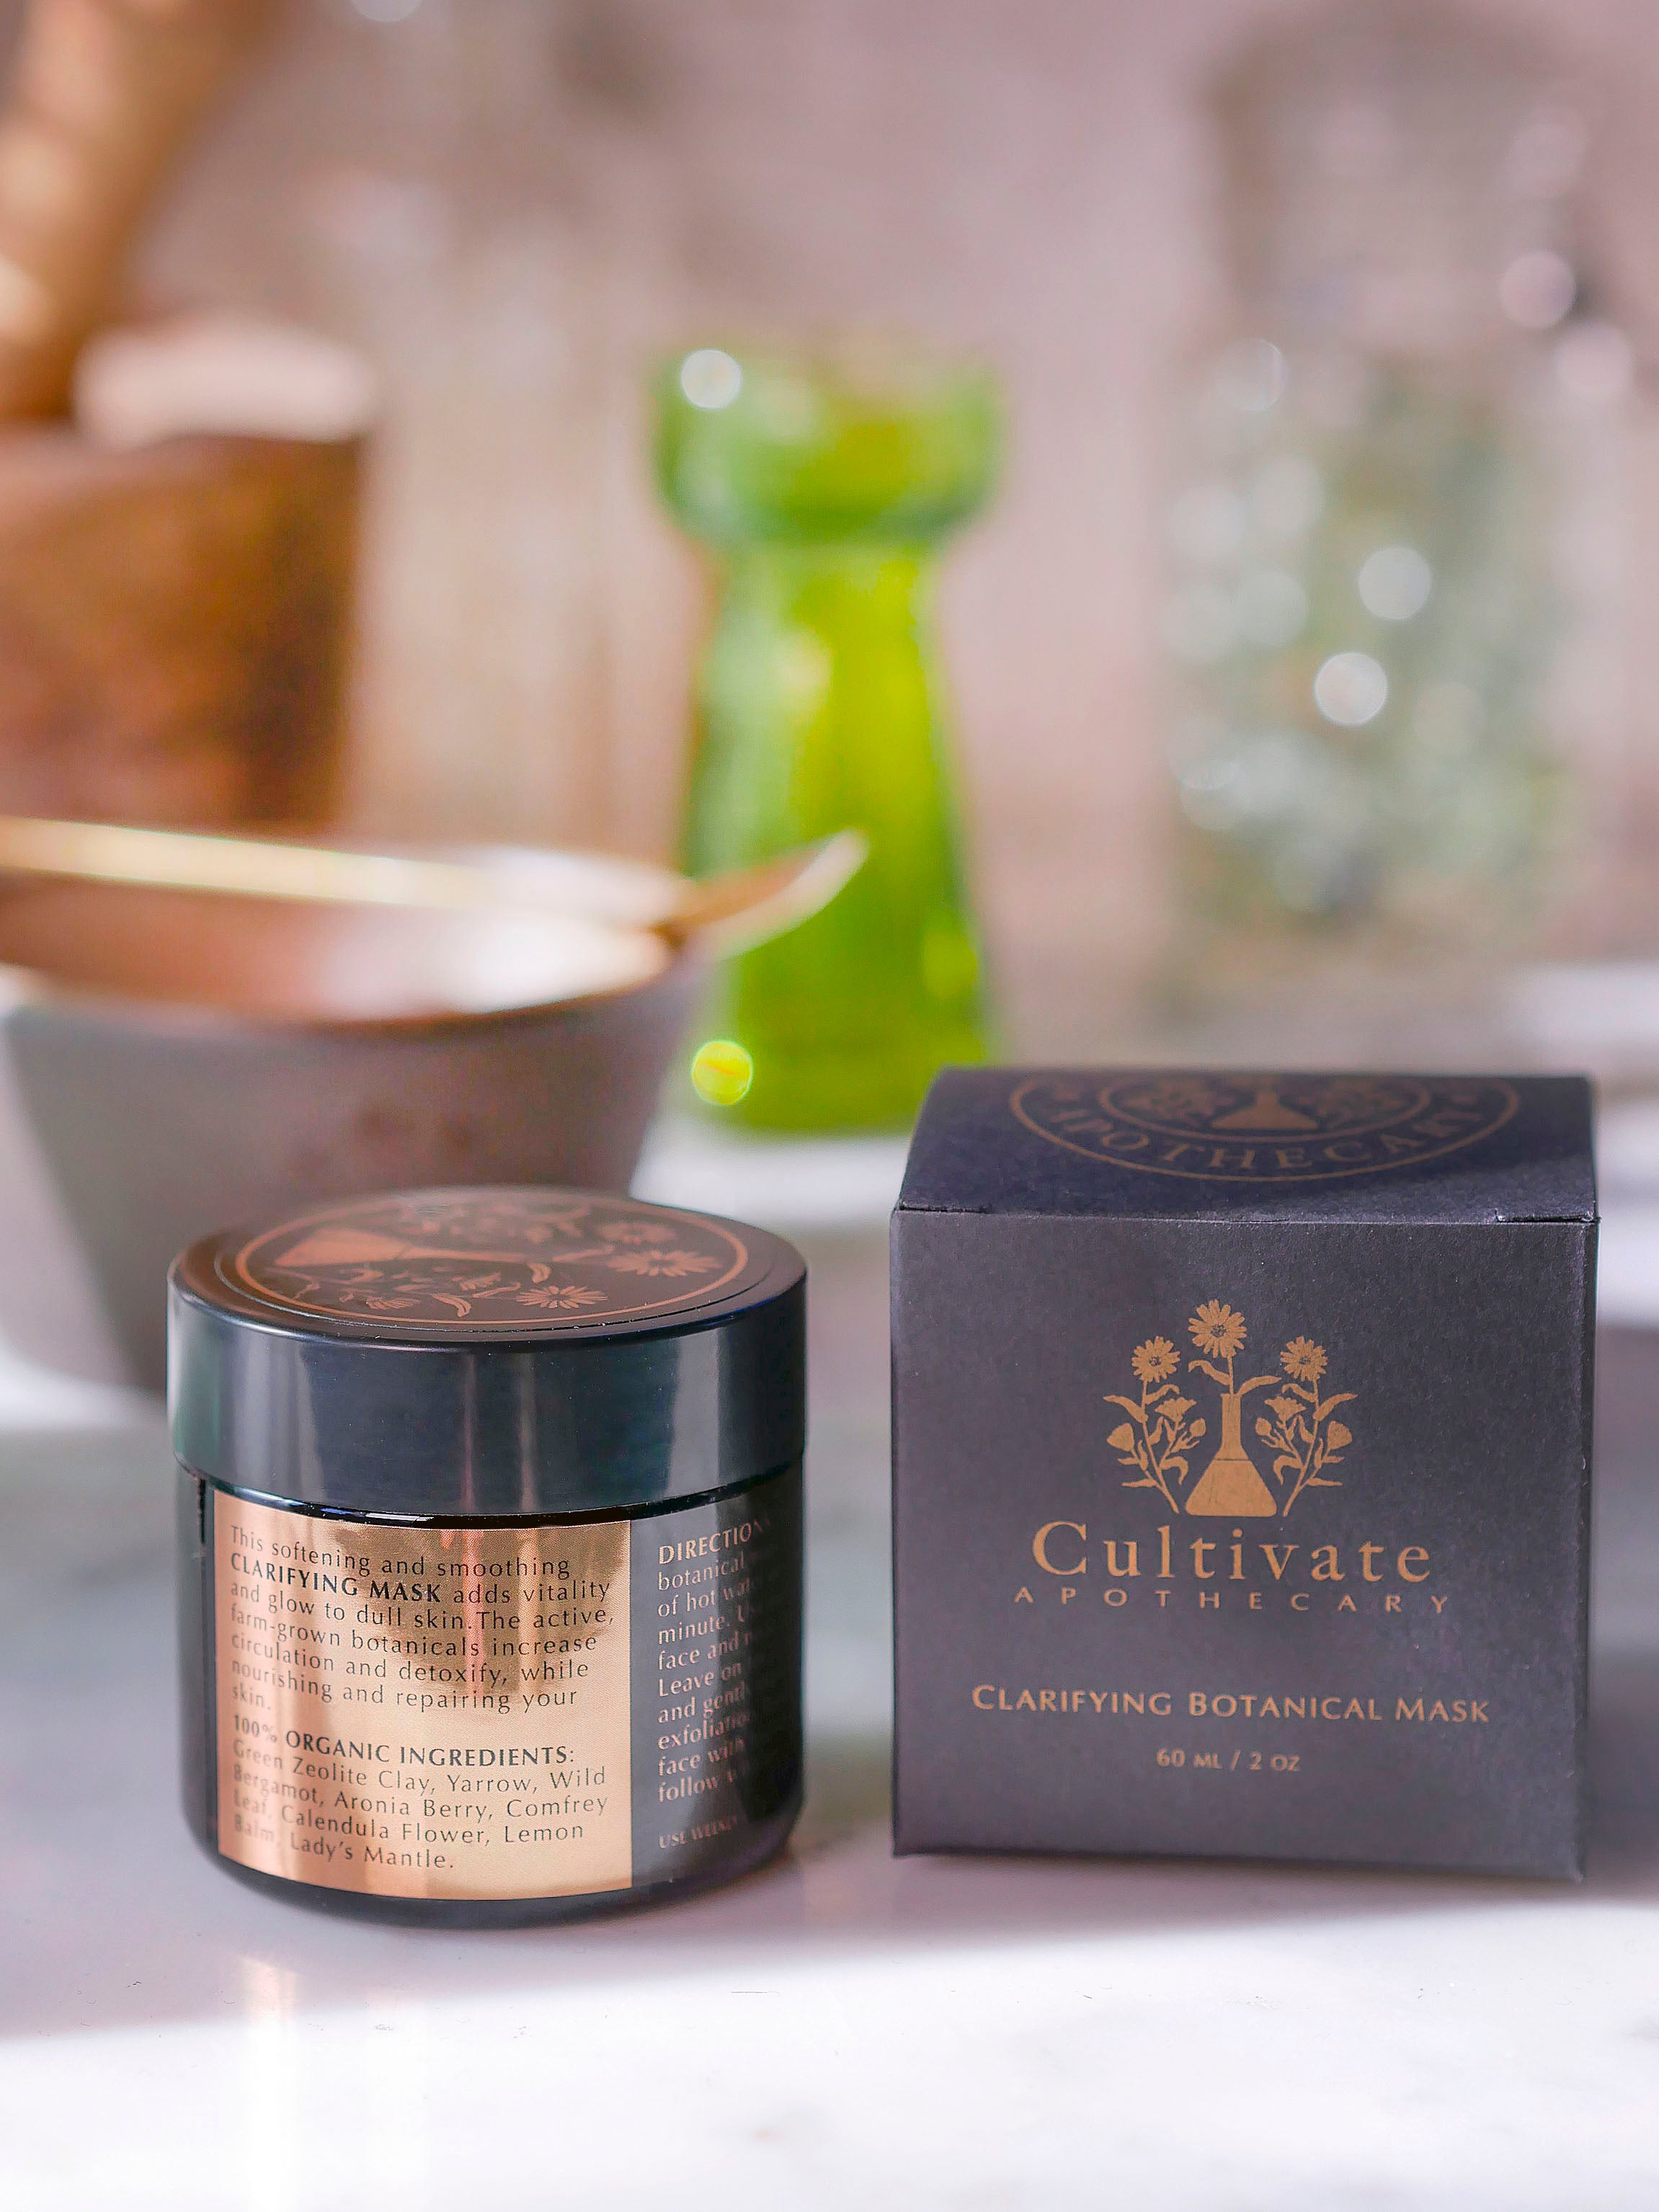 Clarifying green clay face mask product and packaging.